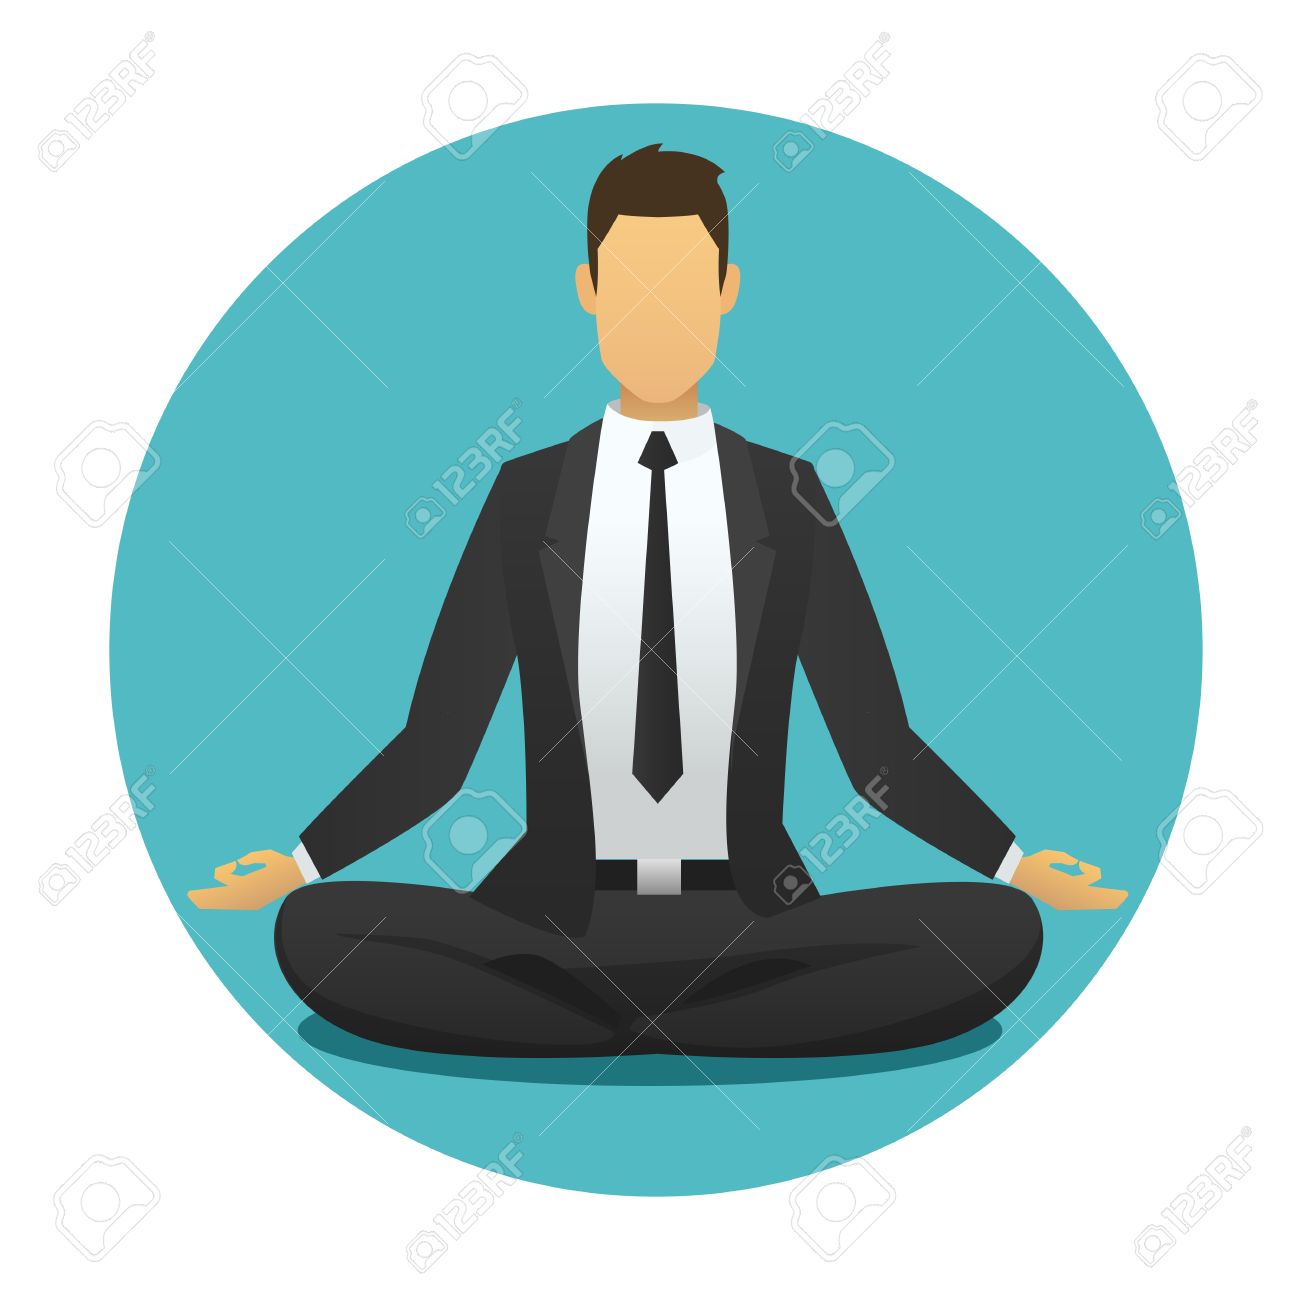 Meditation - Free sports and competition icons